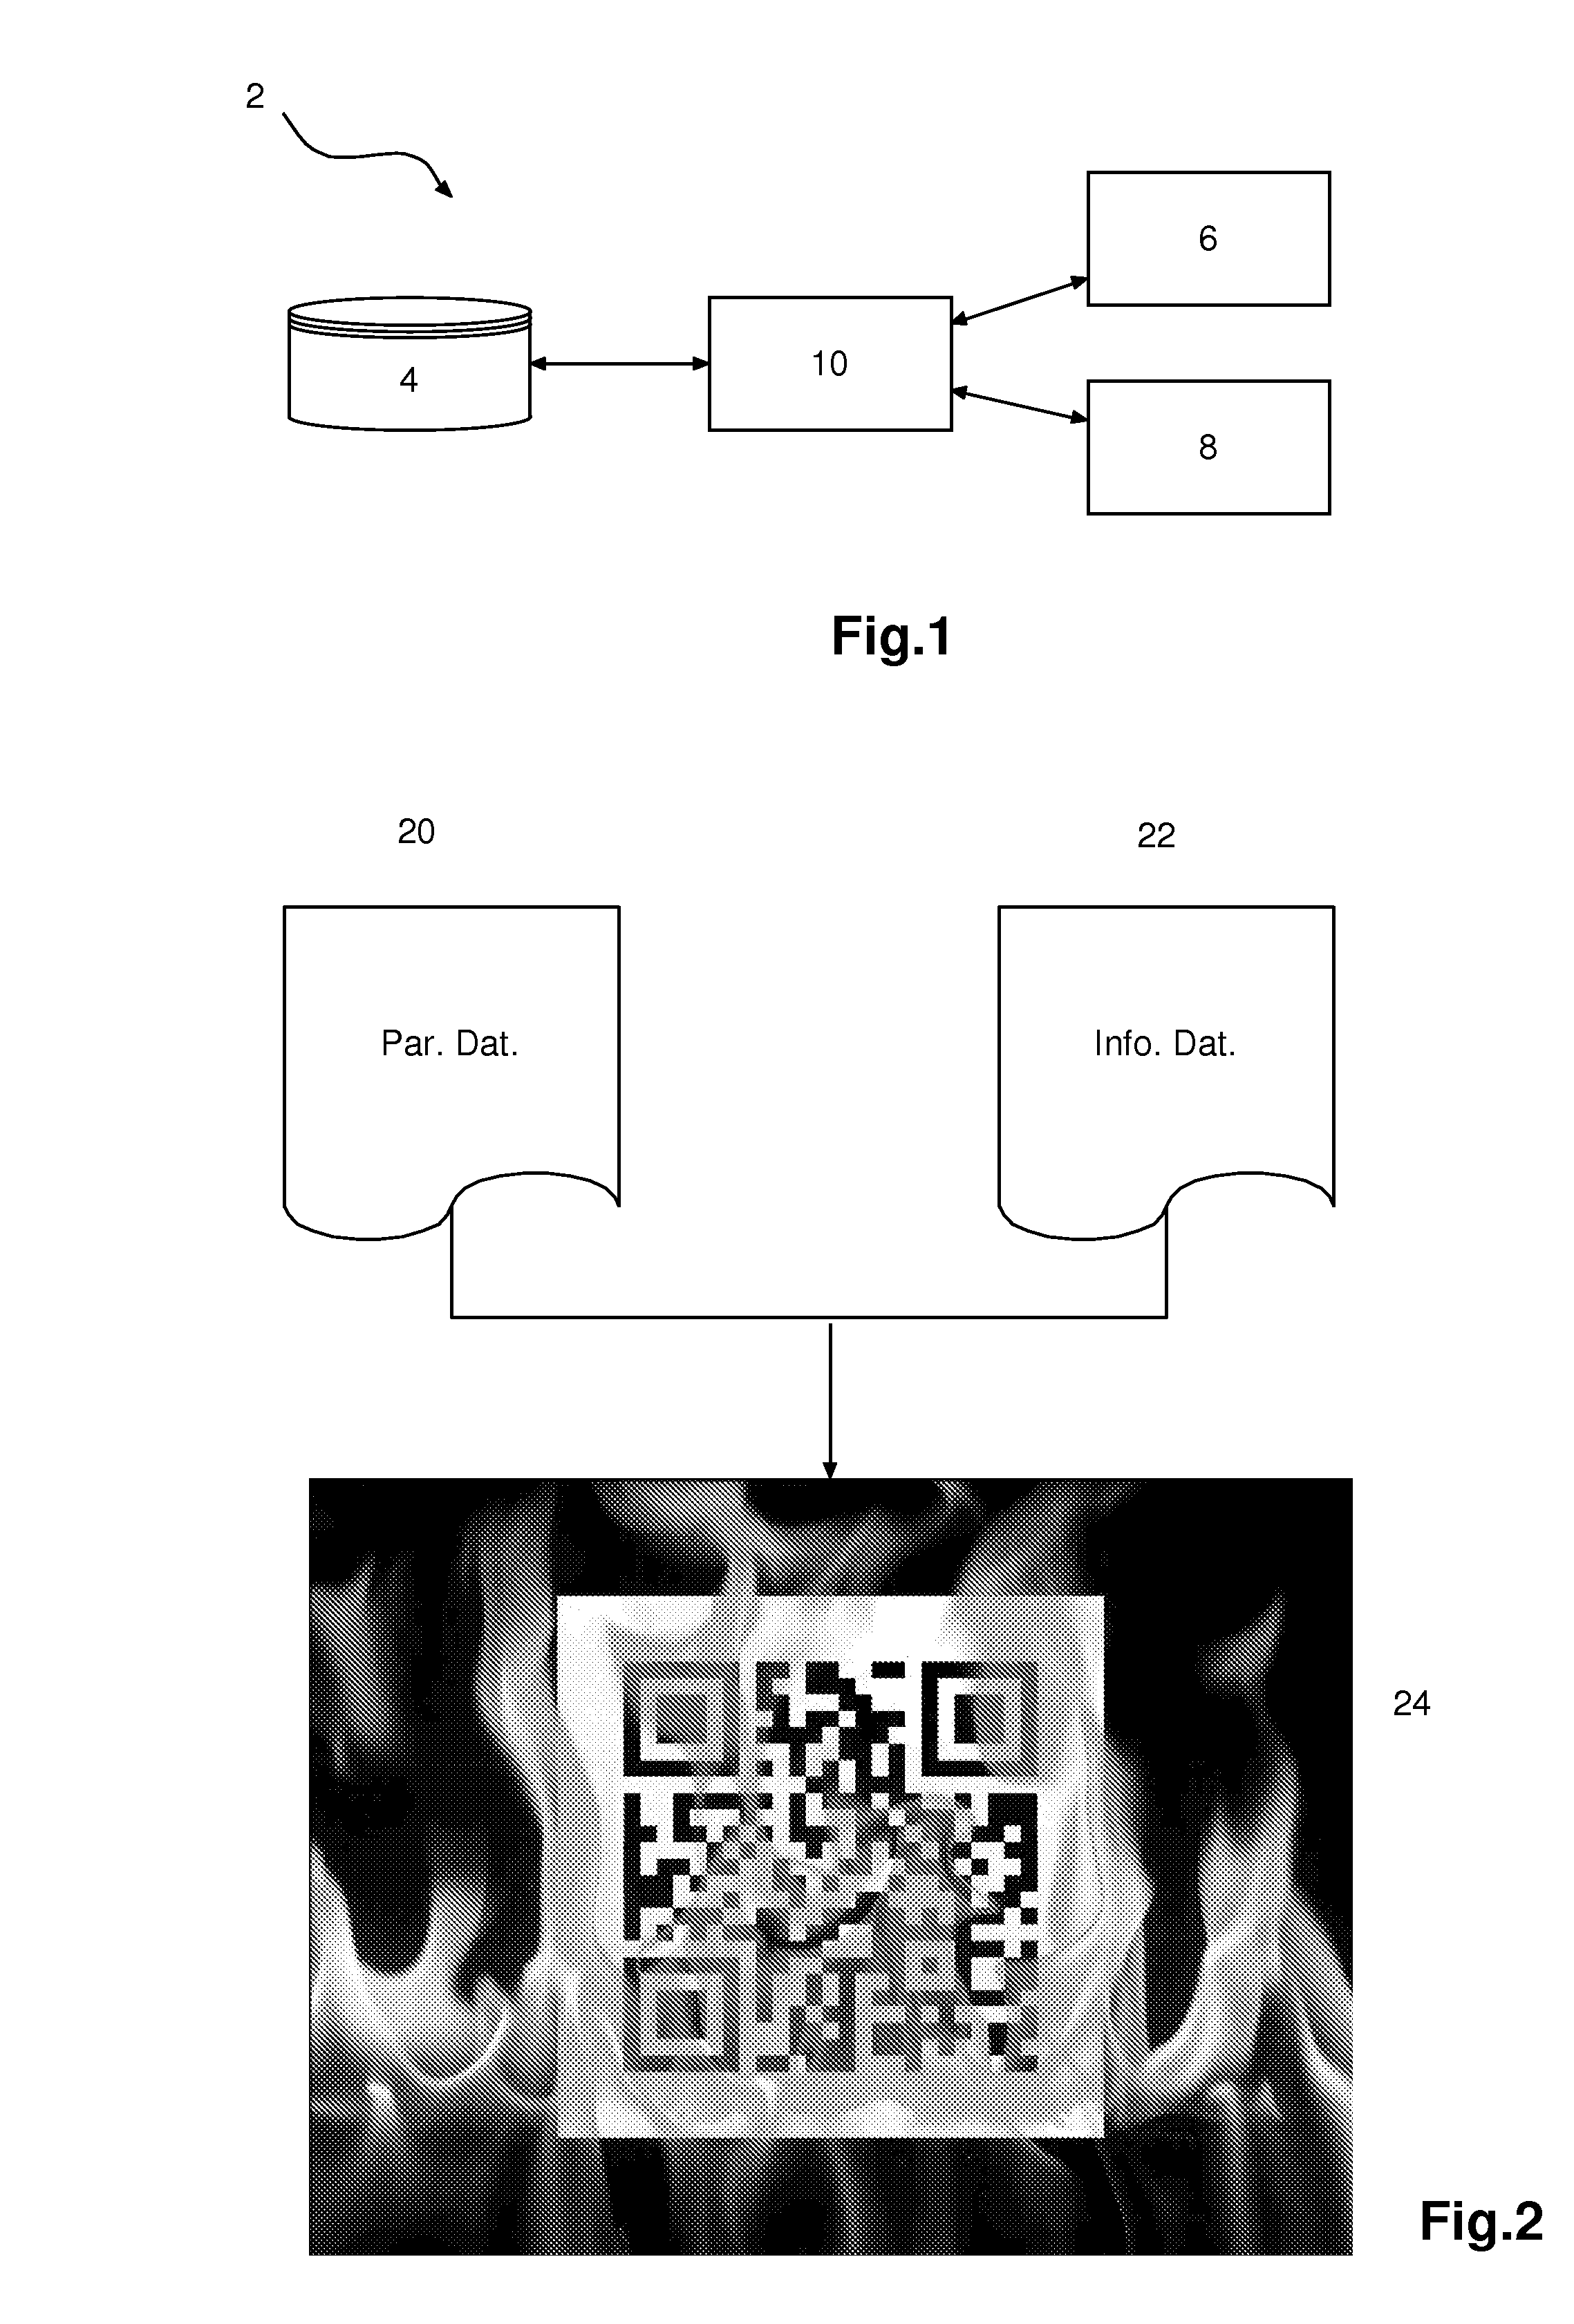 Optical-reading code preparation device